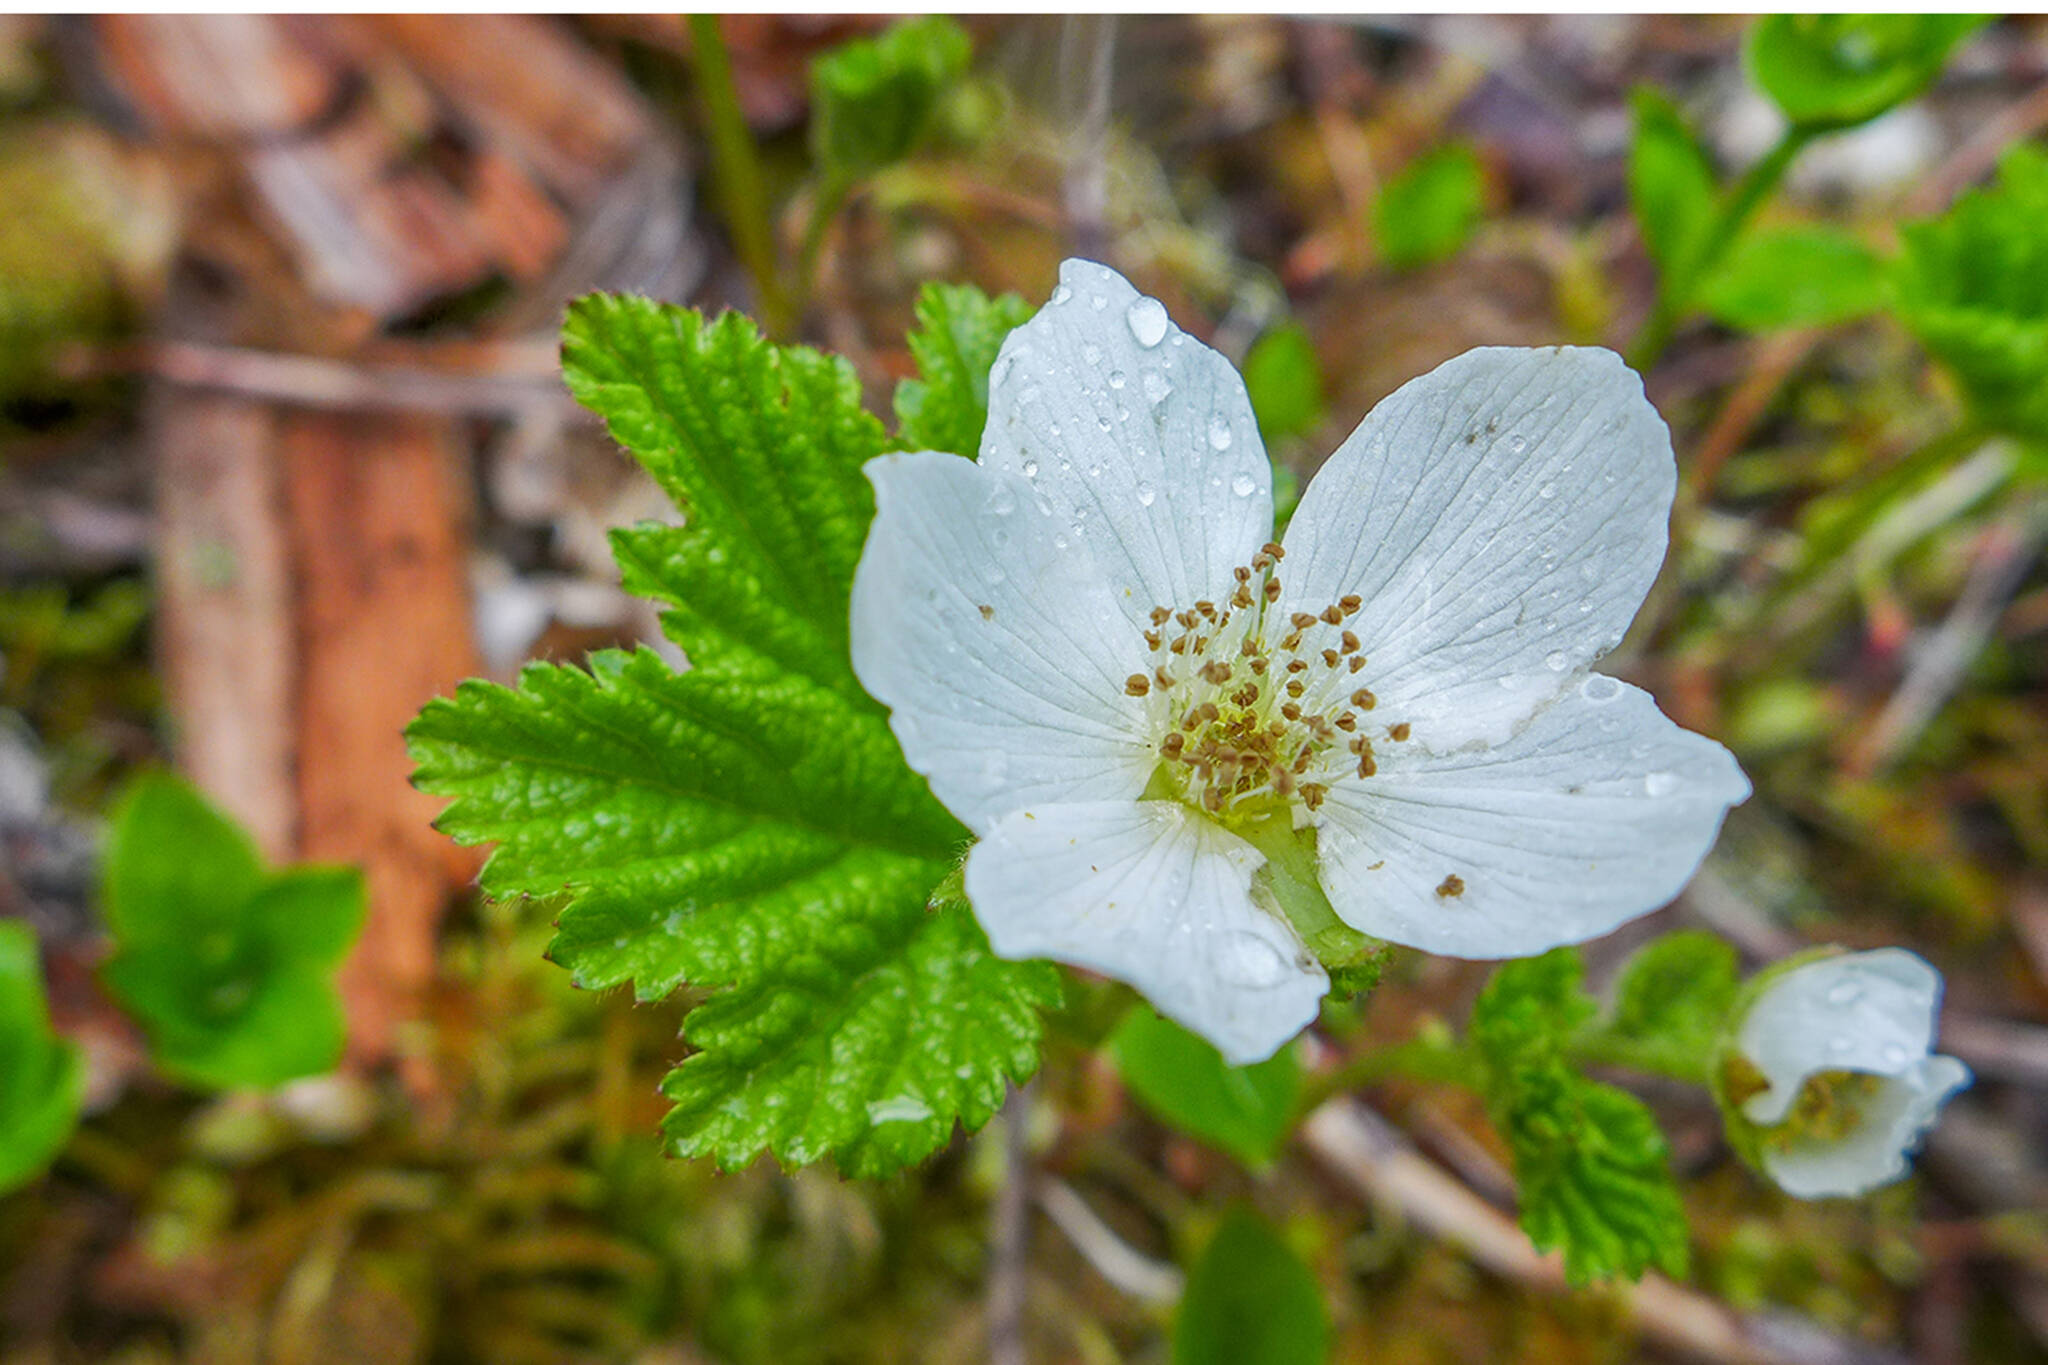 A male cloudberry flower resembles a female flower but has no visible ovaries. (Courtesy Photo / Kerry Howard)